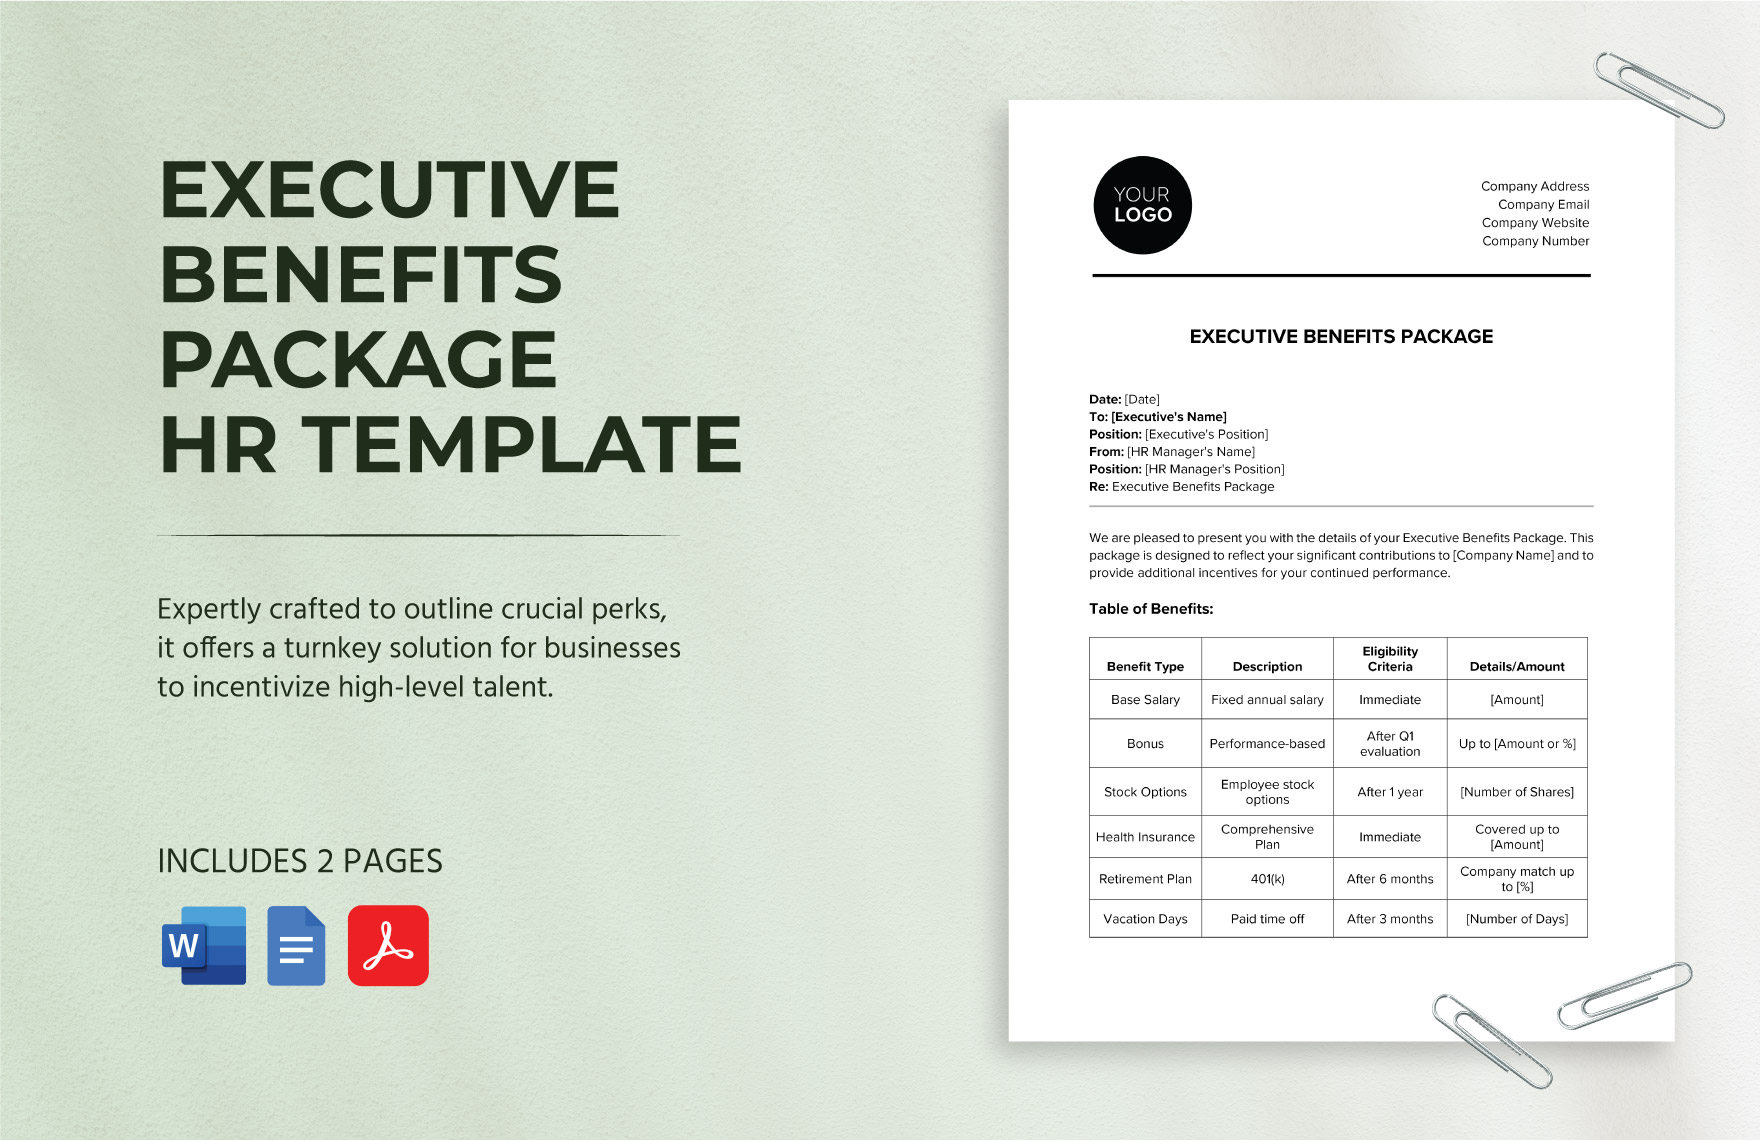 Executive Benefits Package HR Template in Word, Google Docs, PDF